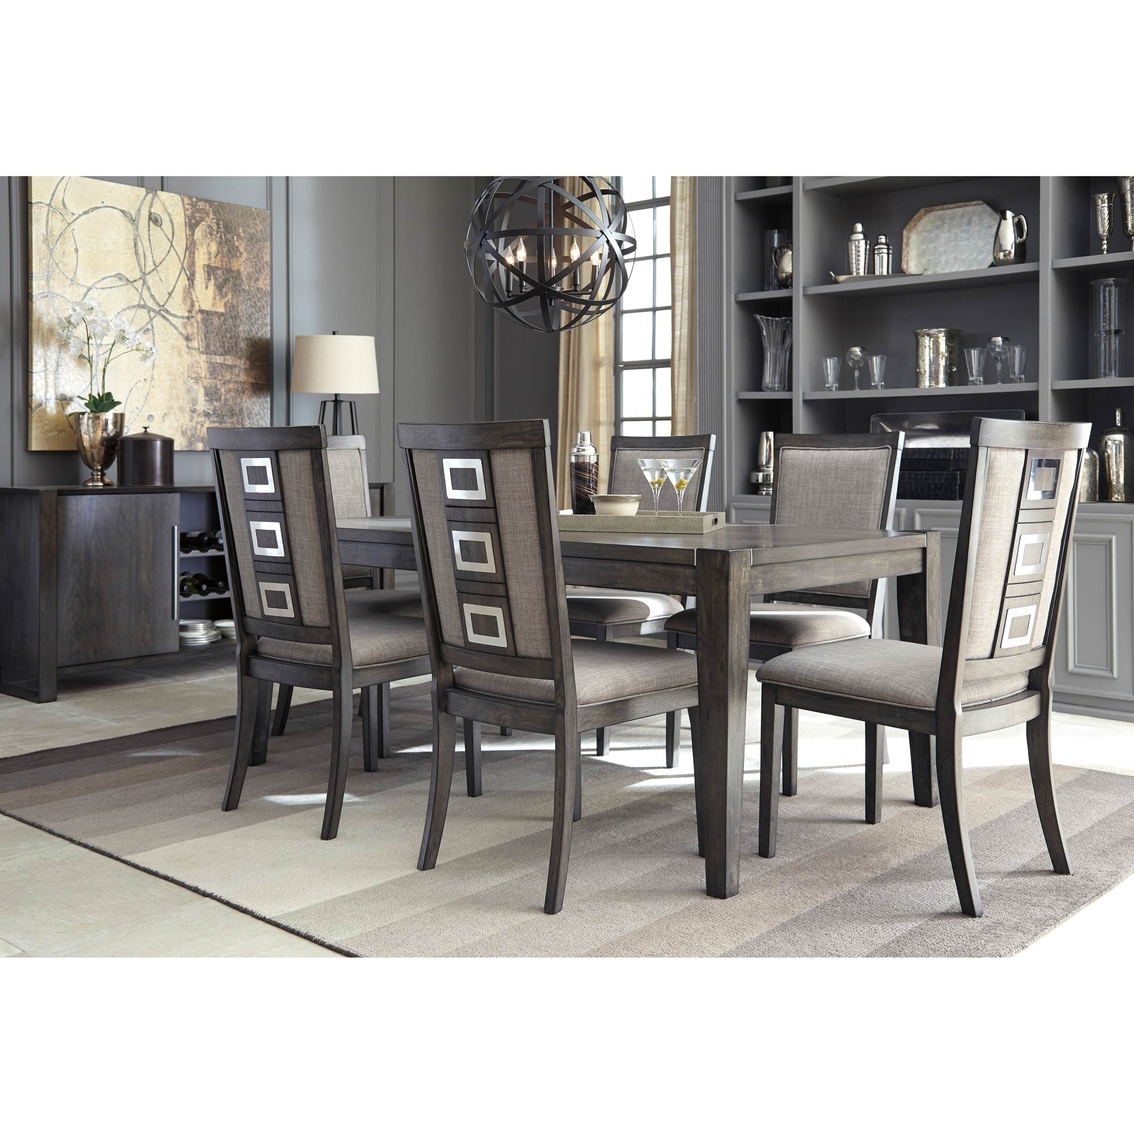 Signature Design by Ashley Chadoni Rectangular Dining Extension Table - Image 2 of 4